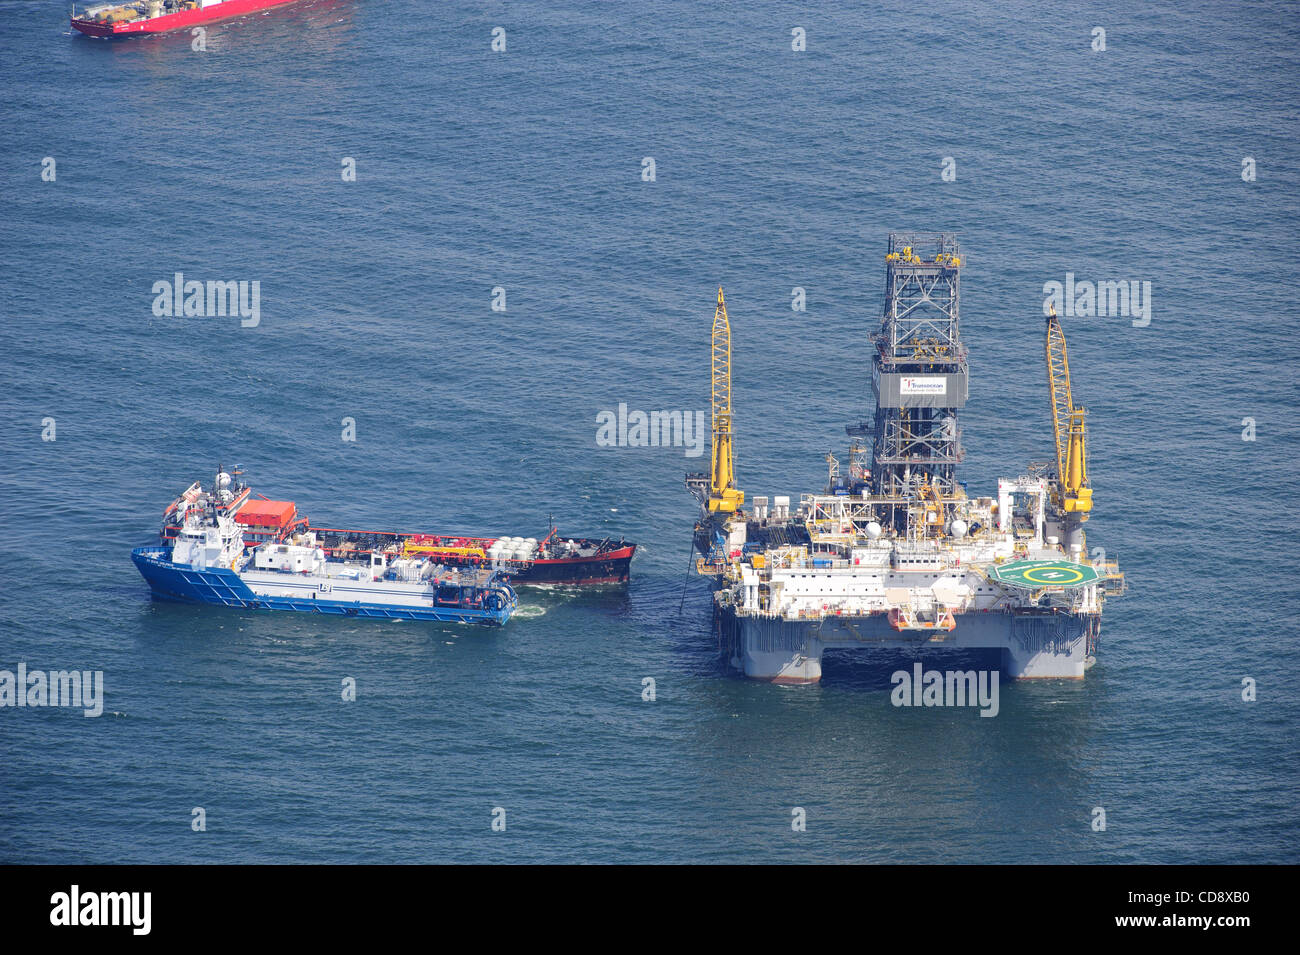 Development driller 3 and support boats at the site of the deepwater horizon oil spill site. The oil leak was capped on july 15th , but the  relief wells continue to permanently seal the busted well. Stock Photo